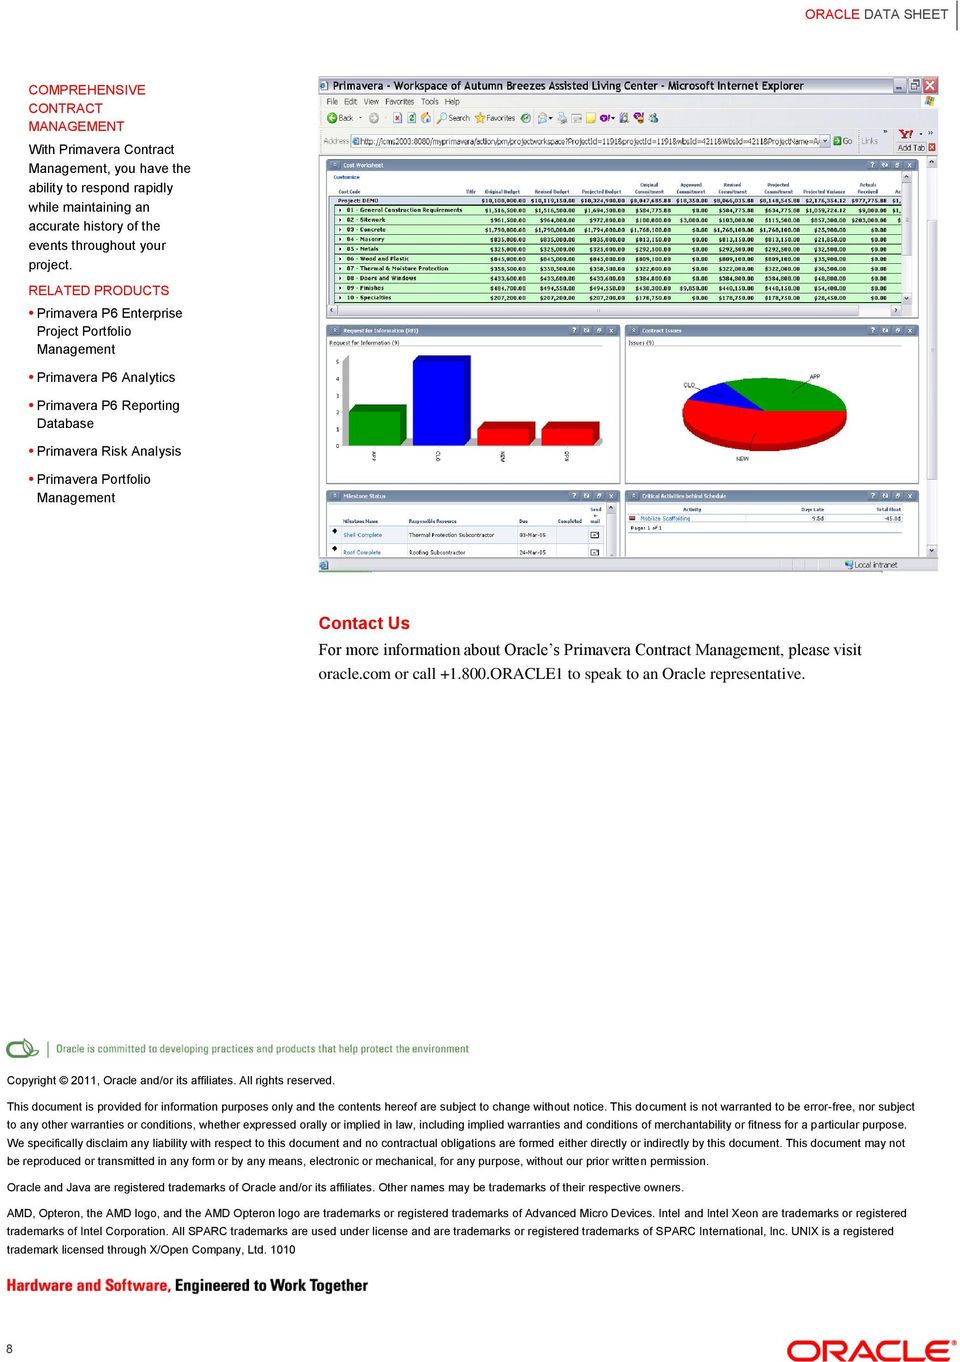 information about Oracle s Primavera Contract Management, please visit oracle.com or call +1.800.ORACLE1 to speak to an Oracle representative. Copyright 2011, Oracle and/or its affiliates.